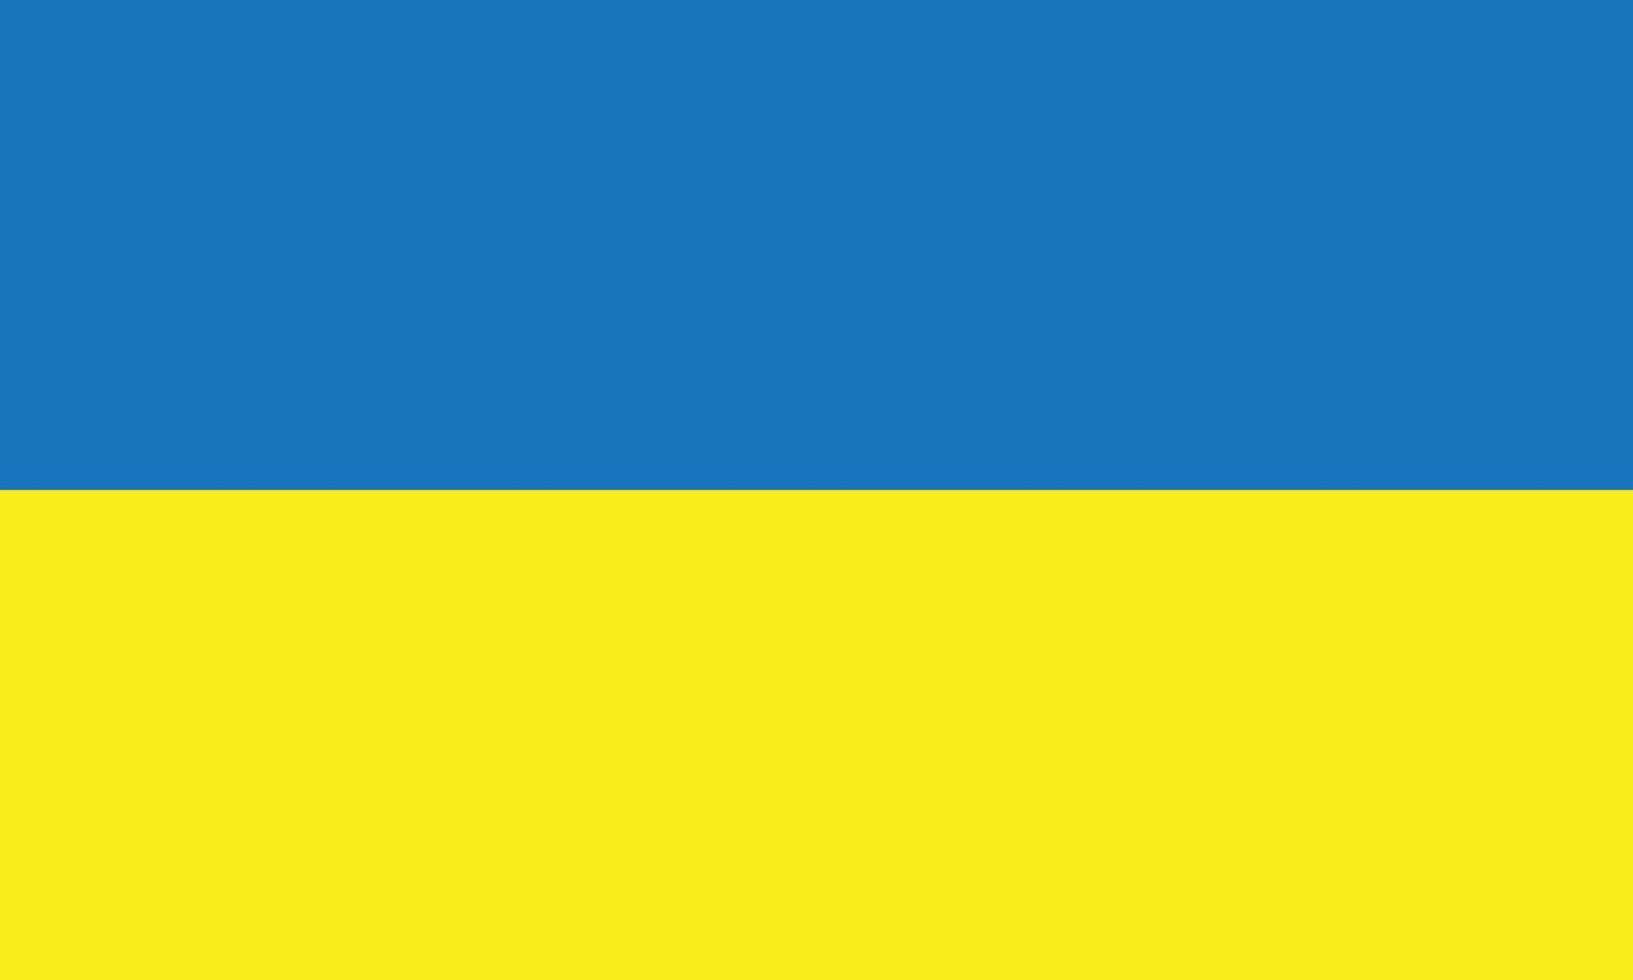 eps10 blue and yellow vector Ukraine flag icon. Ukrainian national flag symbol in a simple flat trendy modern style for your website design, logo, pictogram, UI, and mobile application